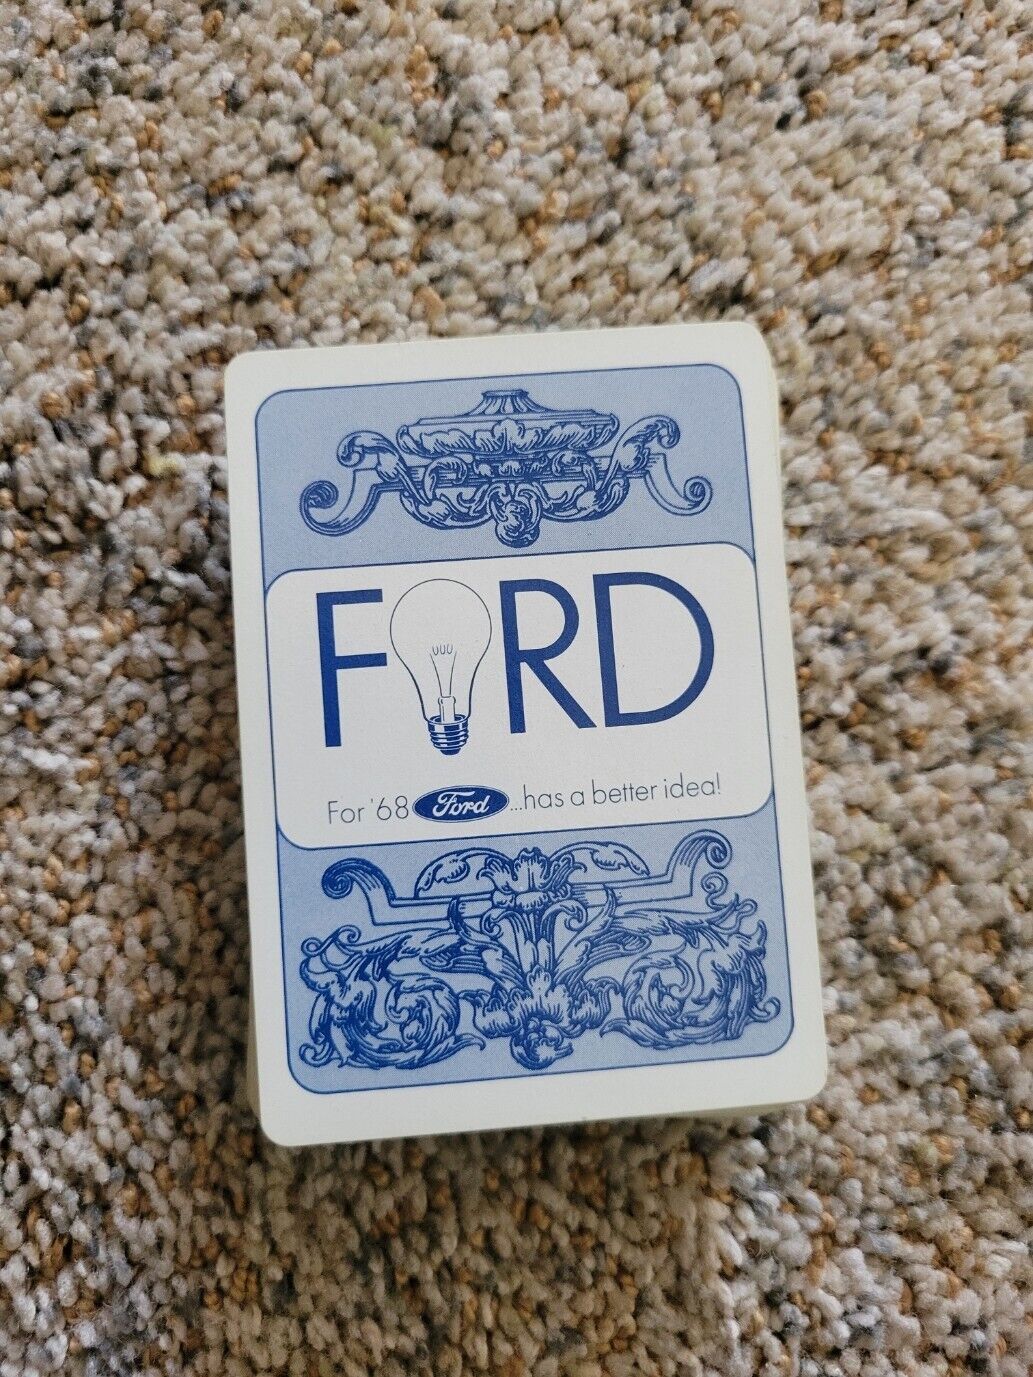 RARE Vintage 1968 Ford Deck Of Playing Cards